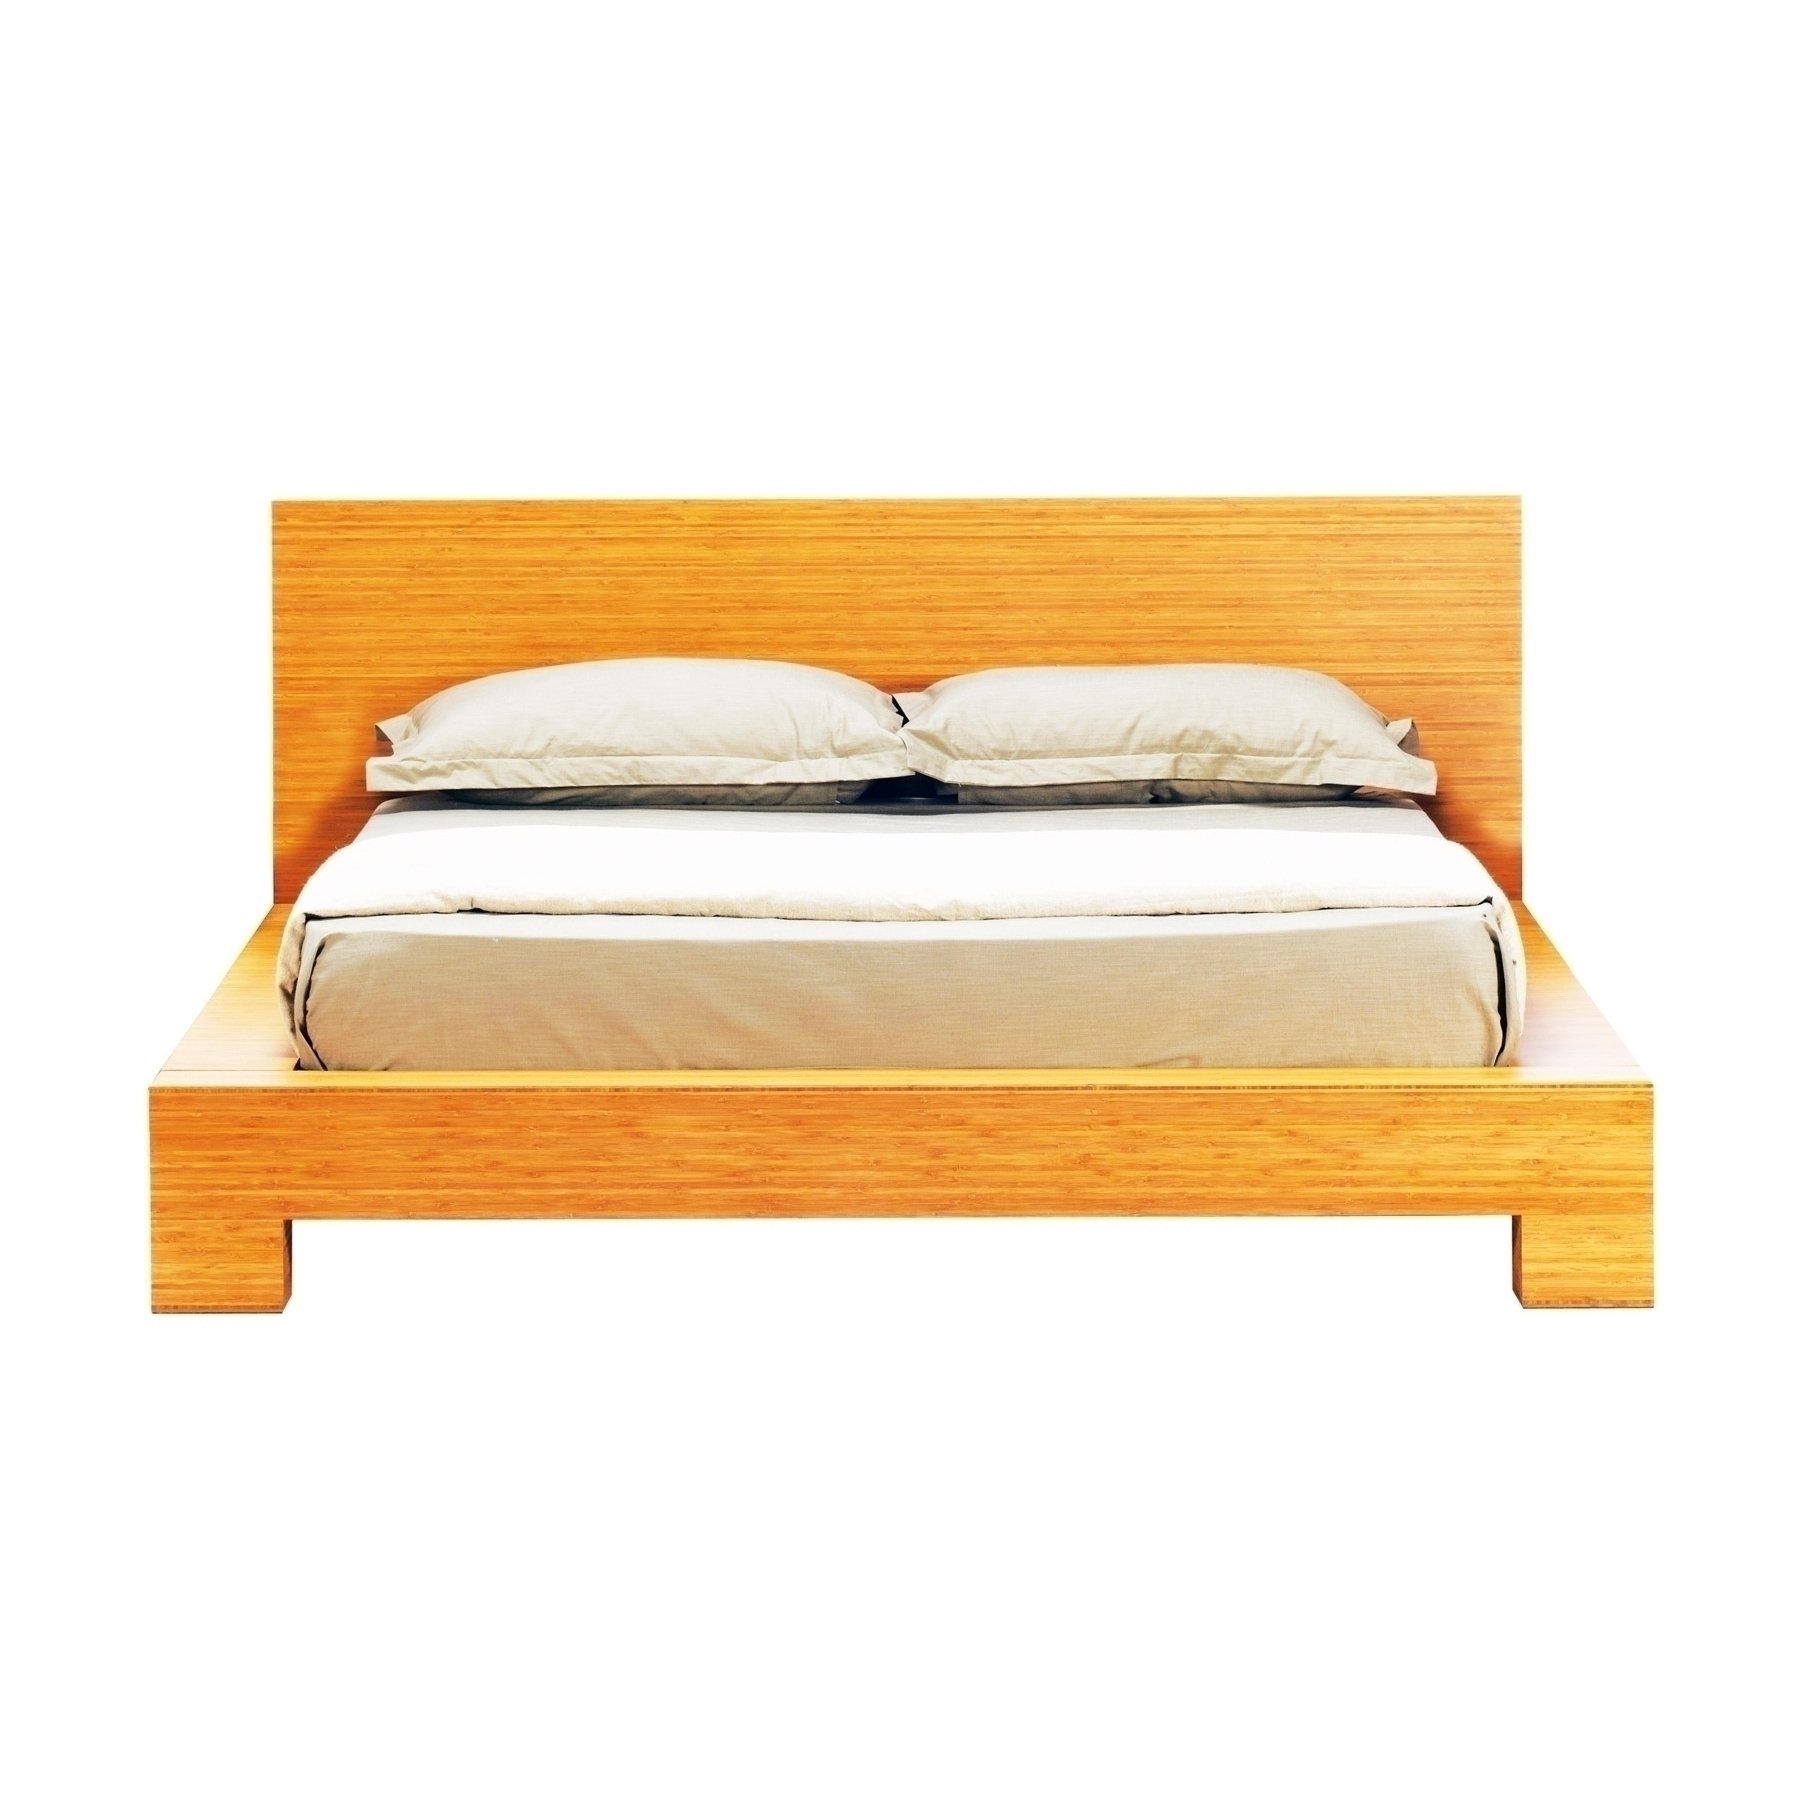 orchid queen platform bed - caramelized